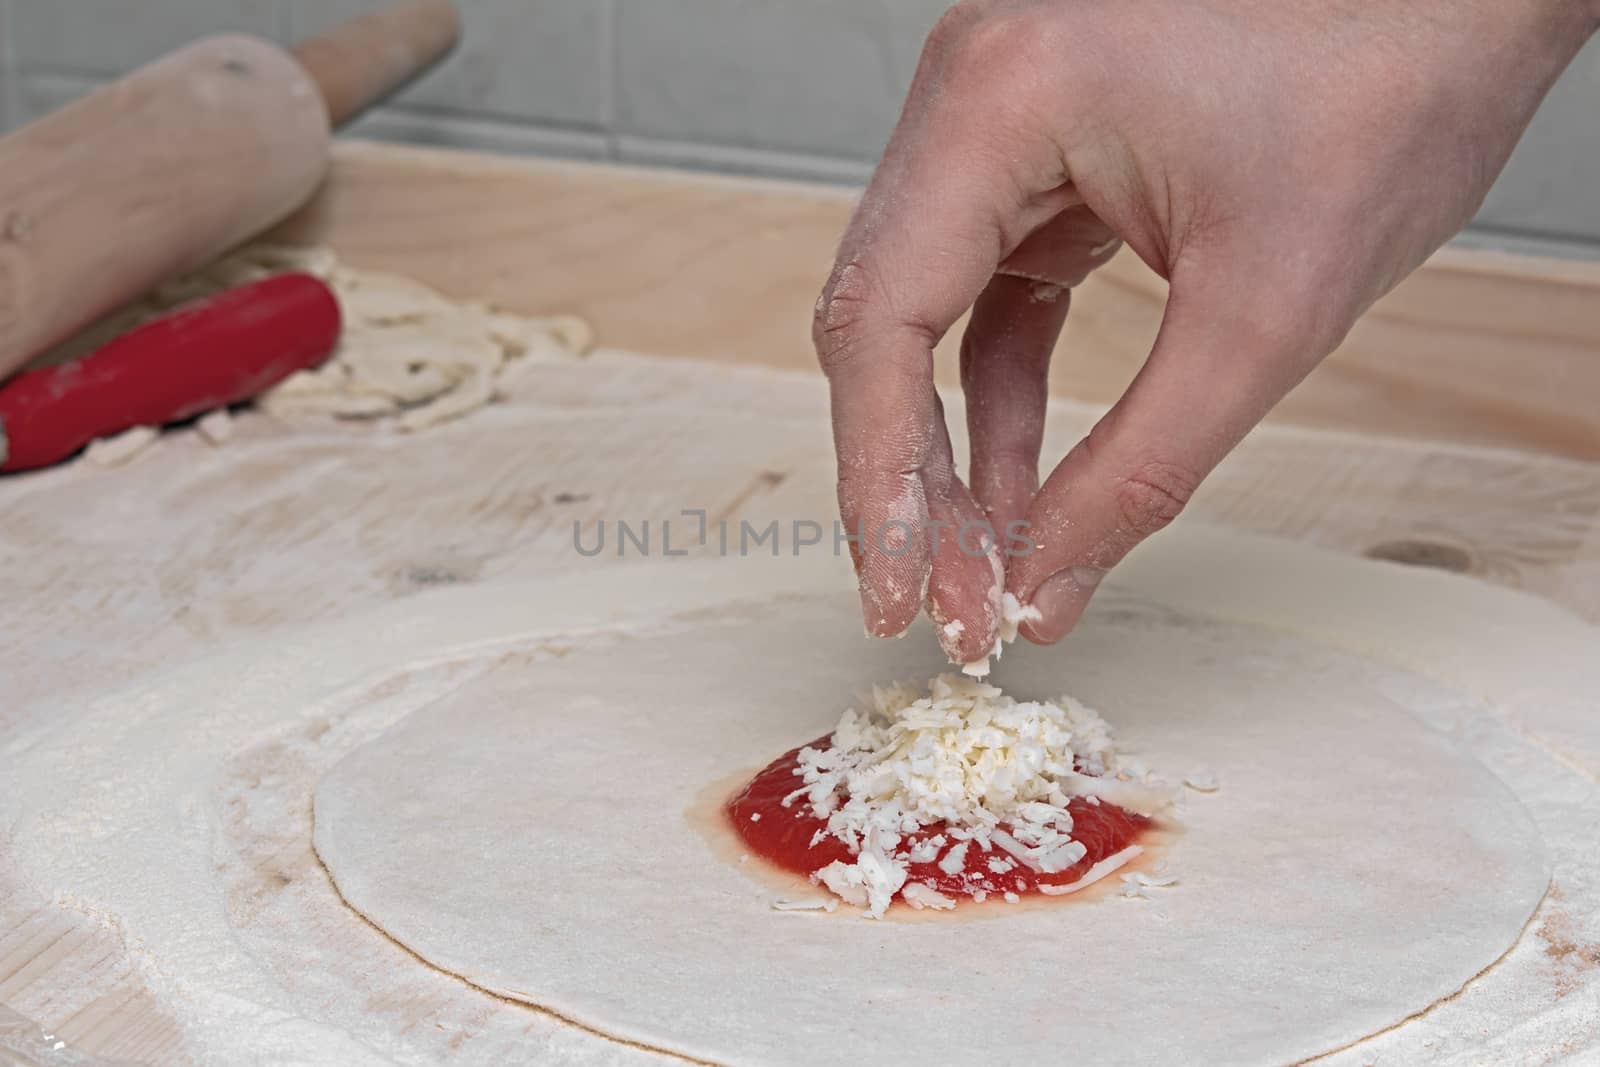 Particularly the preparation of pizza by EnzoArt